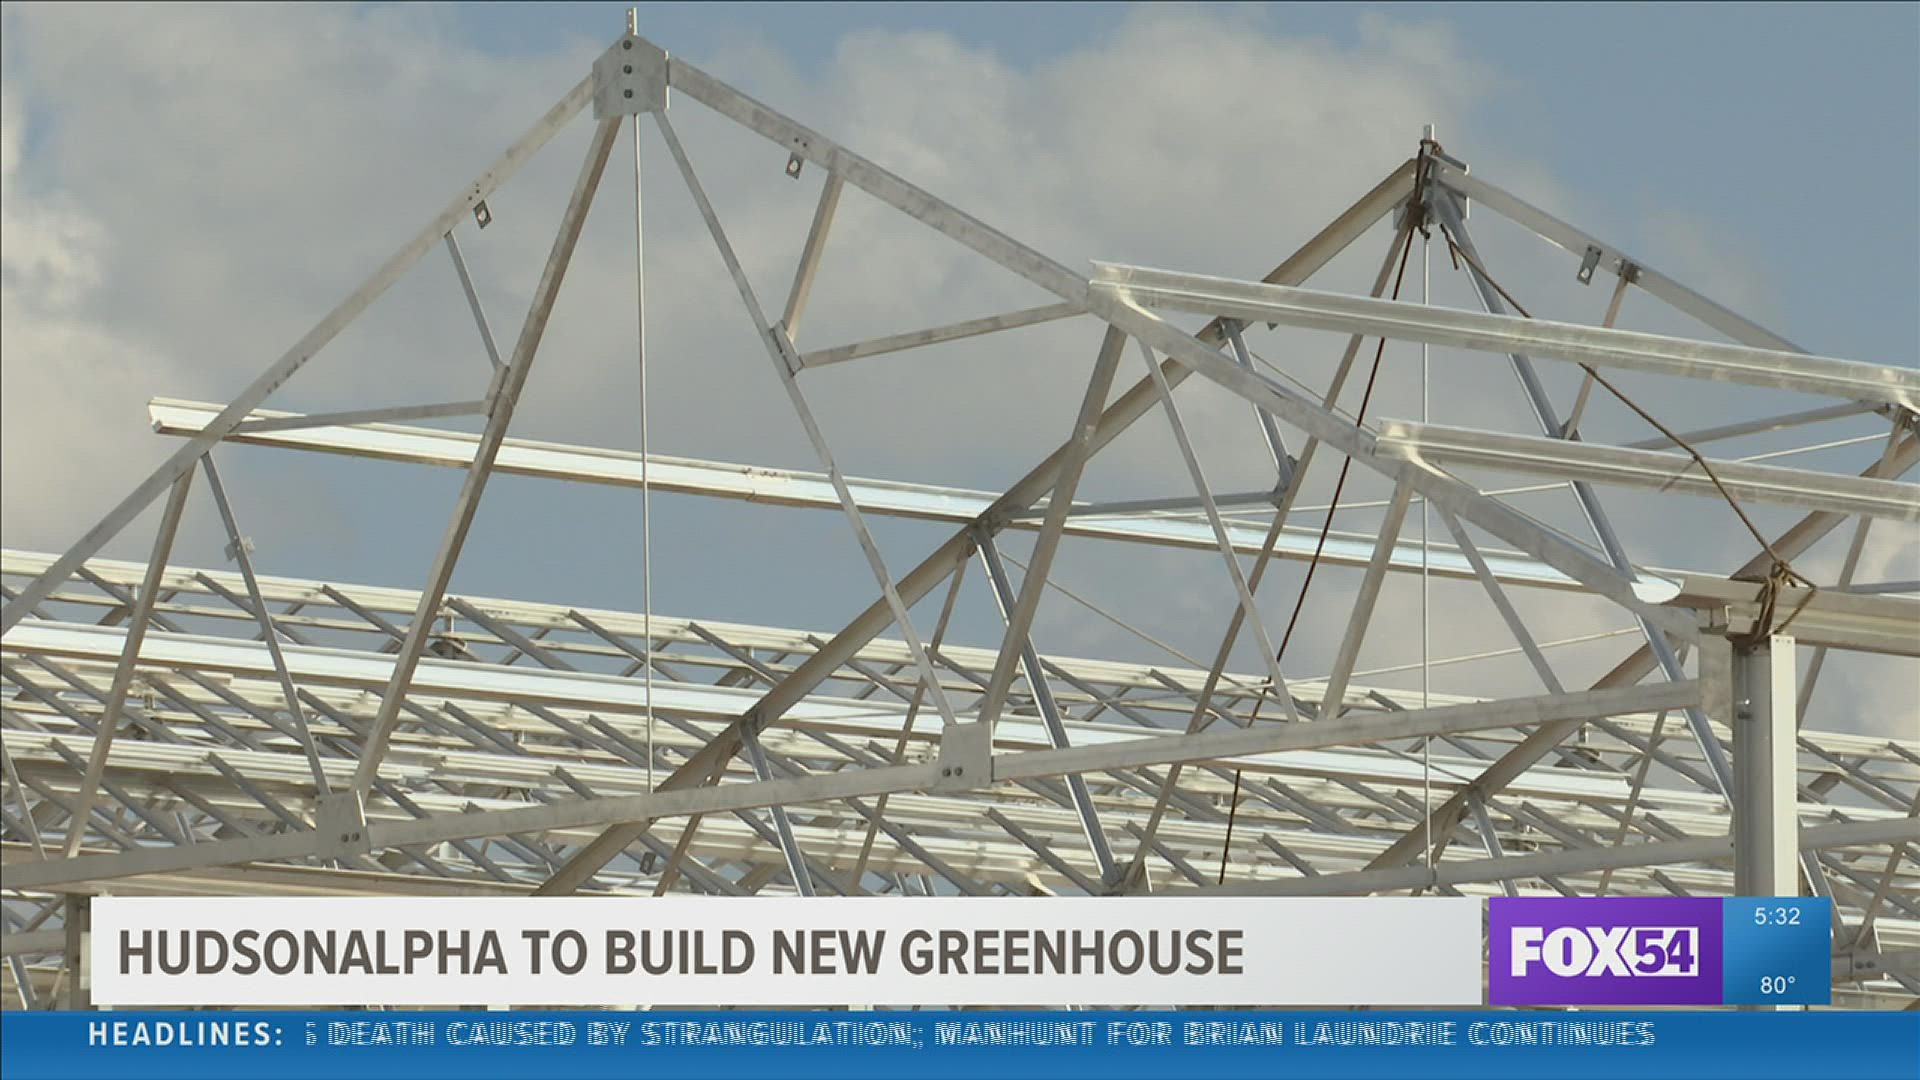 HudsonAlpha's new 6,000 greenhouse could impact the future of agriculture in Alabama.